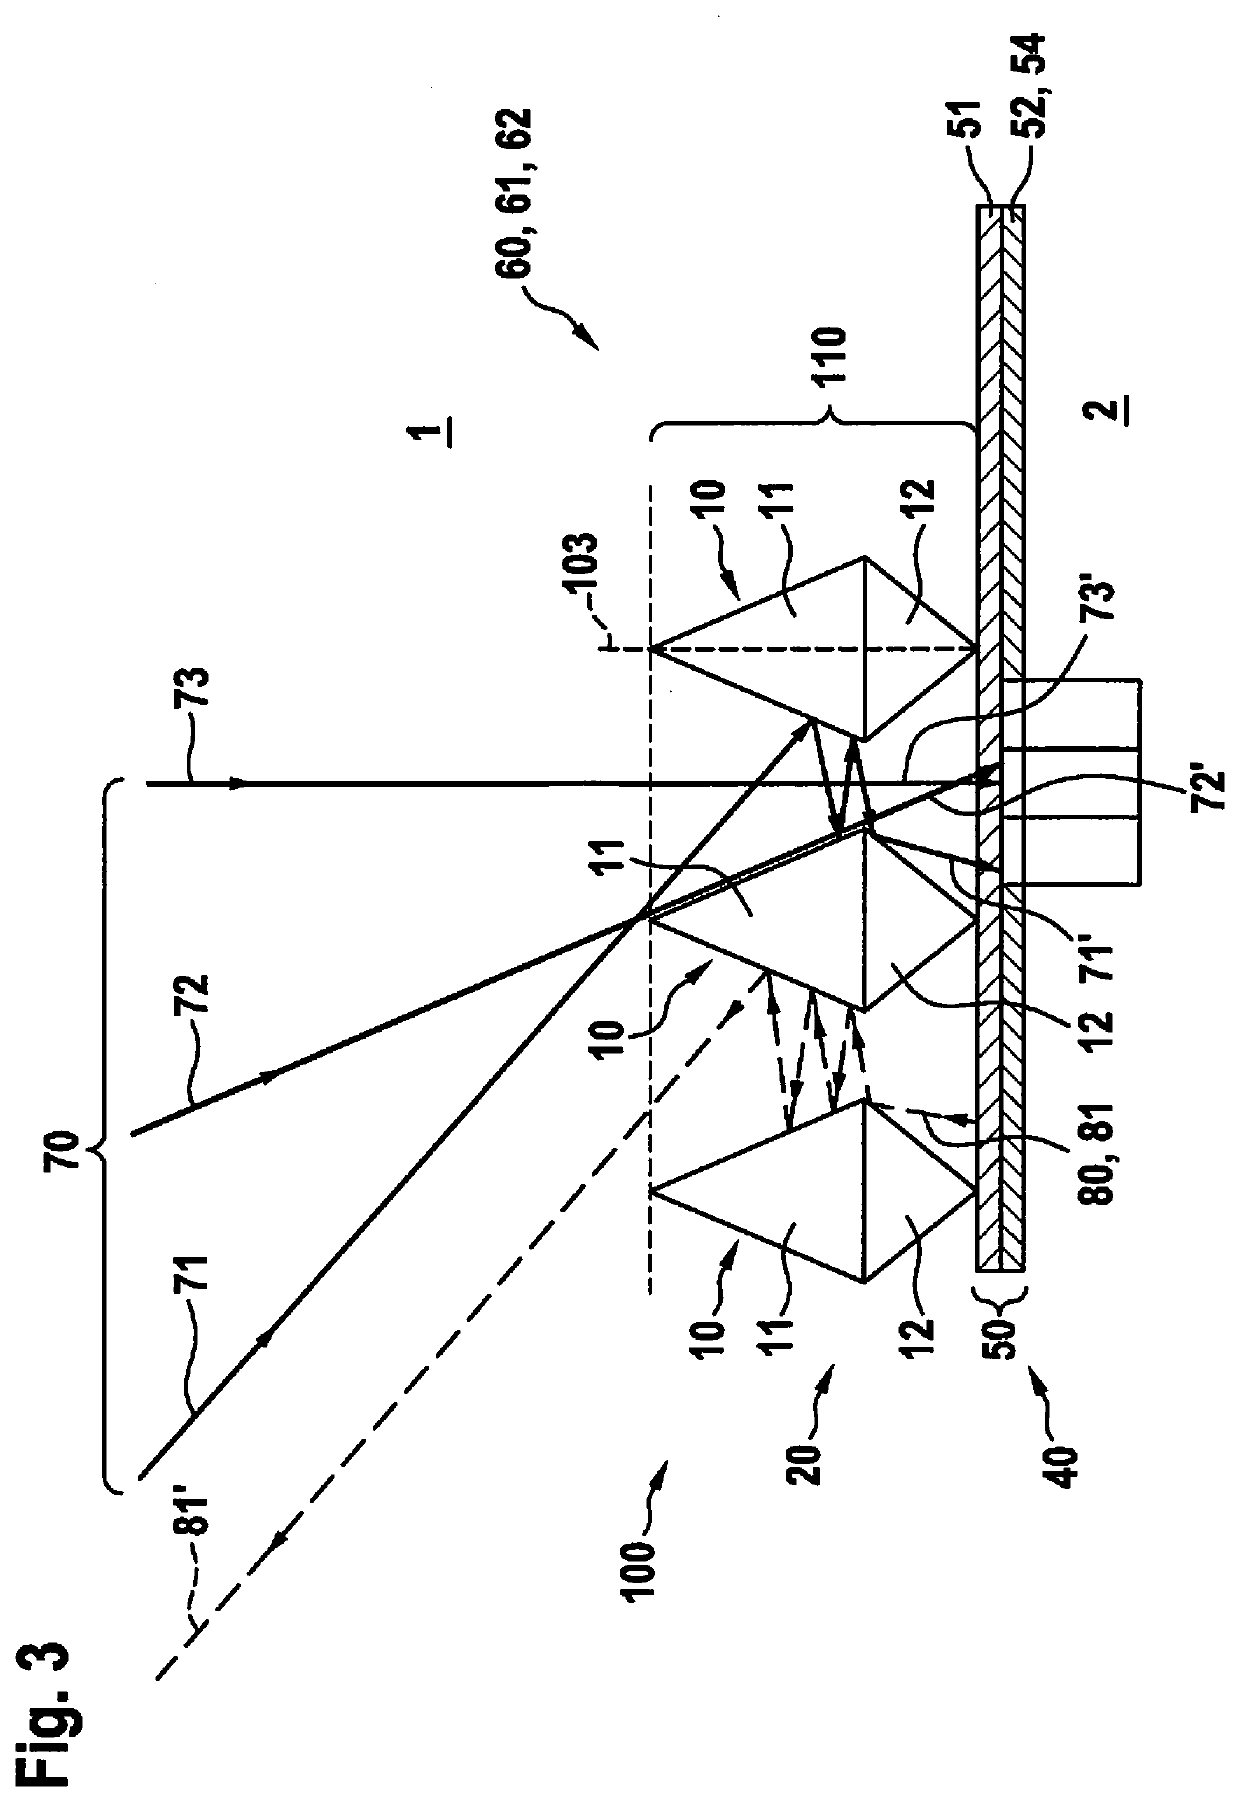 Light transmission element, optical receiving unit, optical actuator unit, lidar system, working device and vehicle